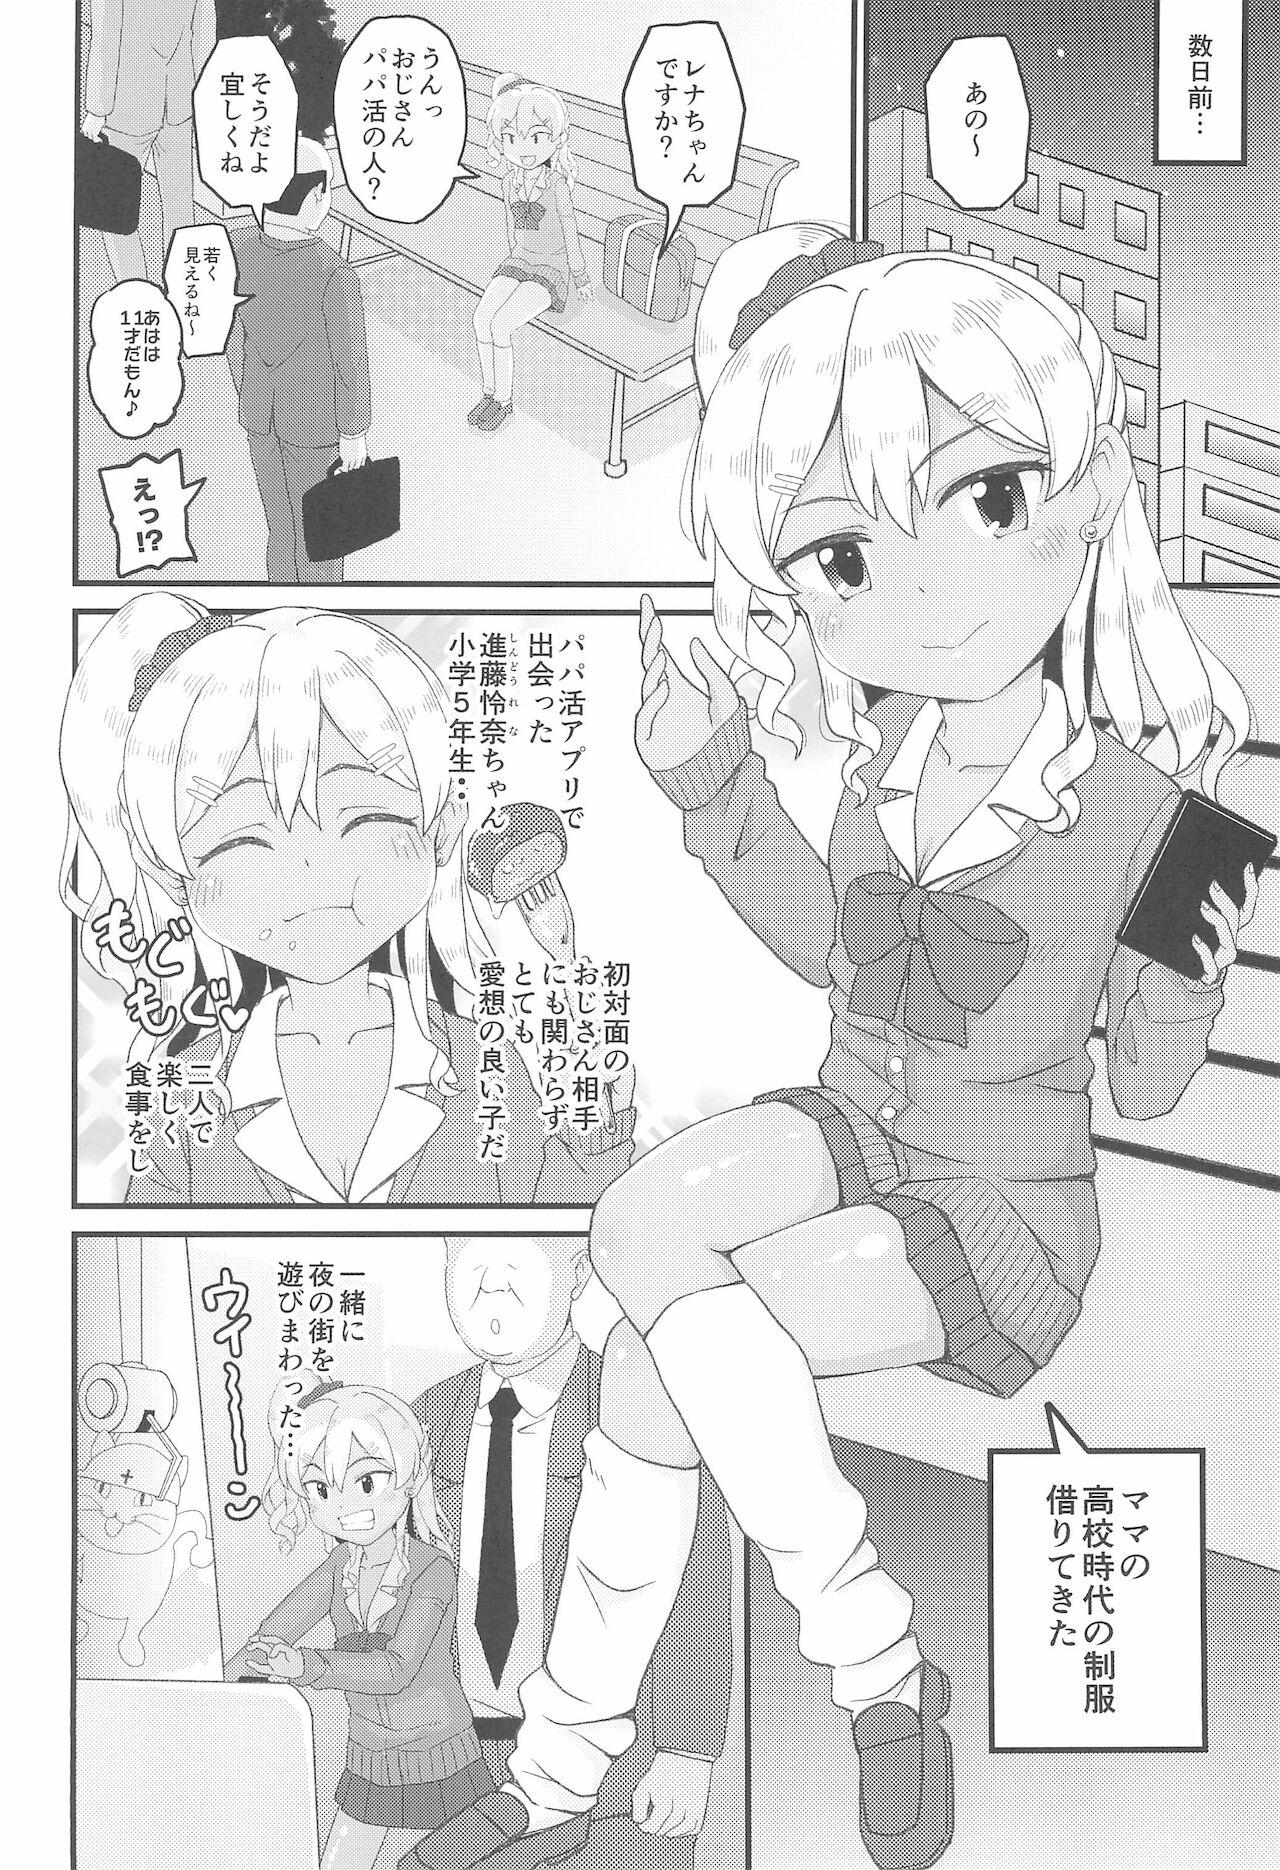 Leaked Loli Bitch Gal to Papakatsux!! - Original Soloboy - Page 6